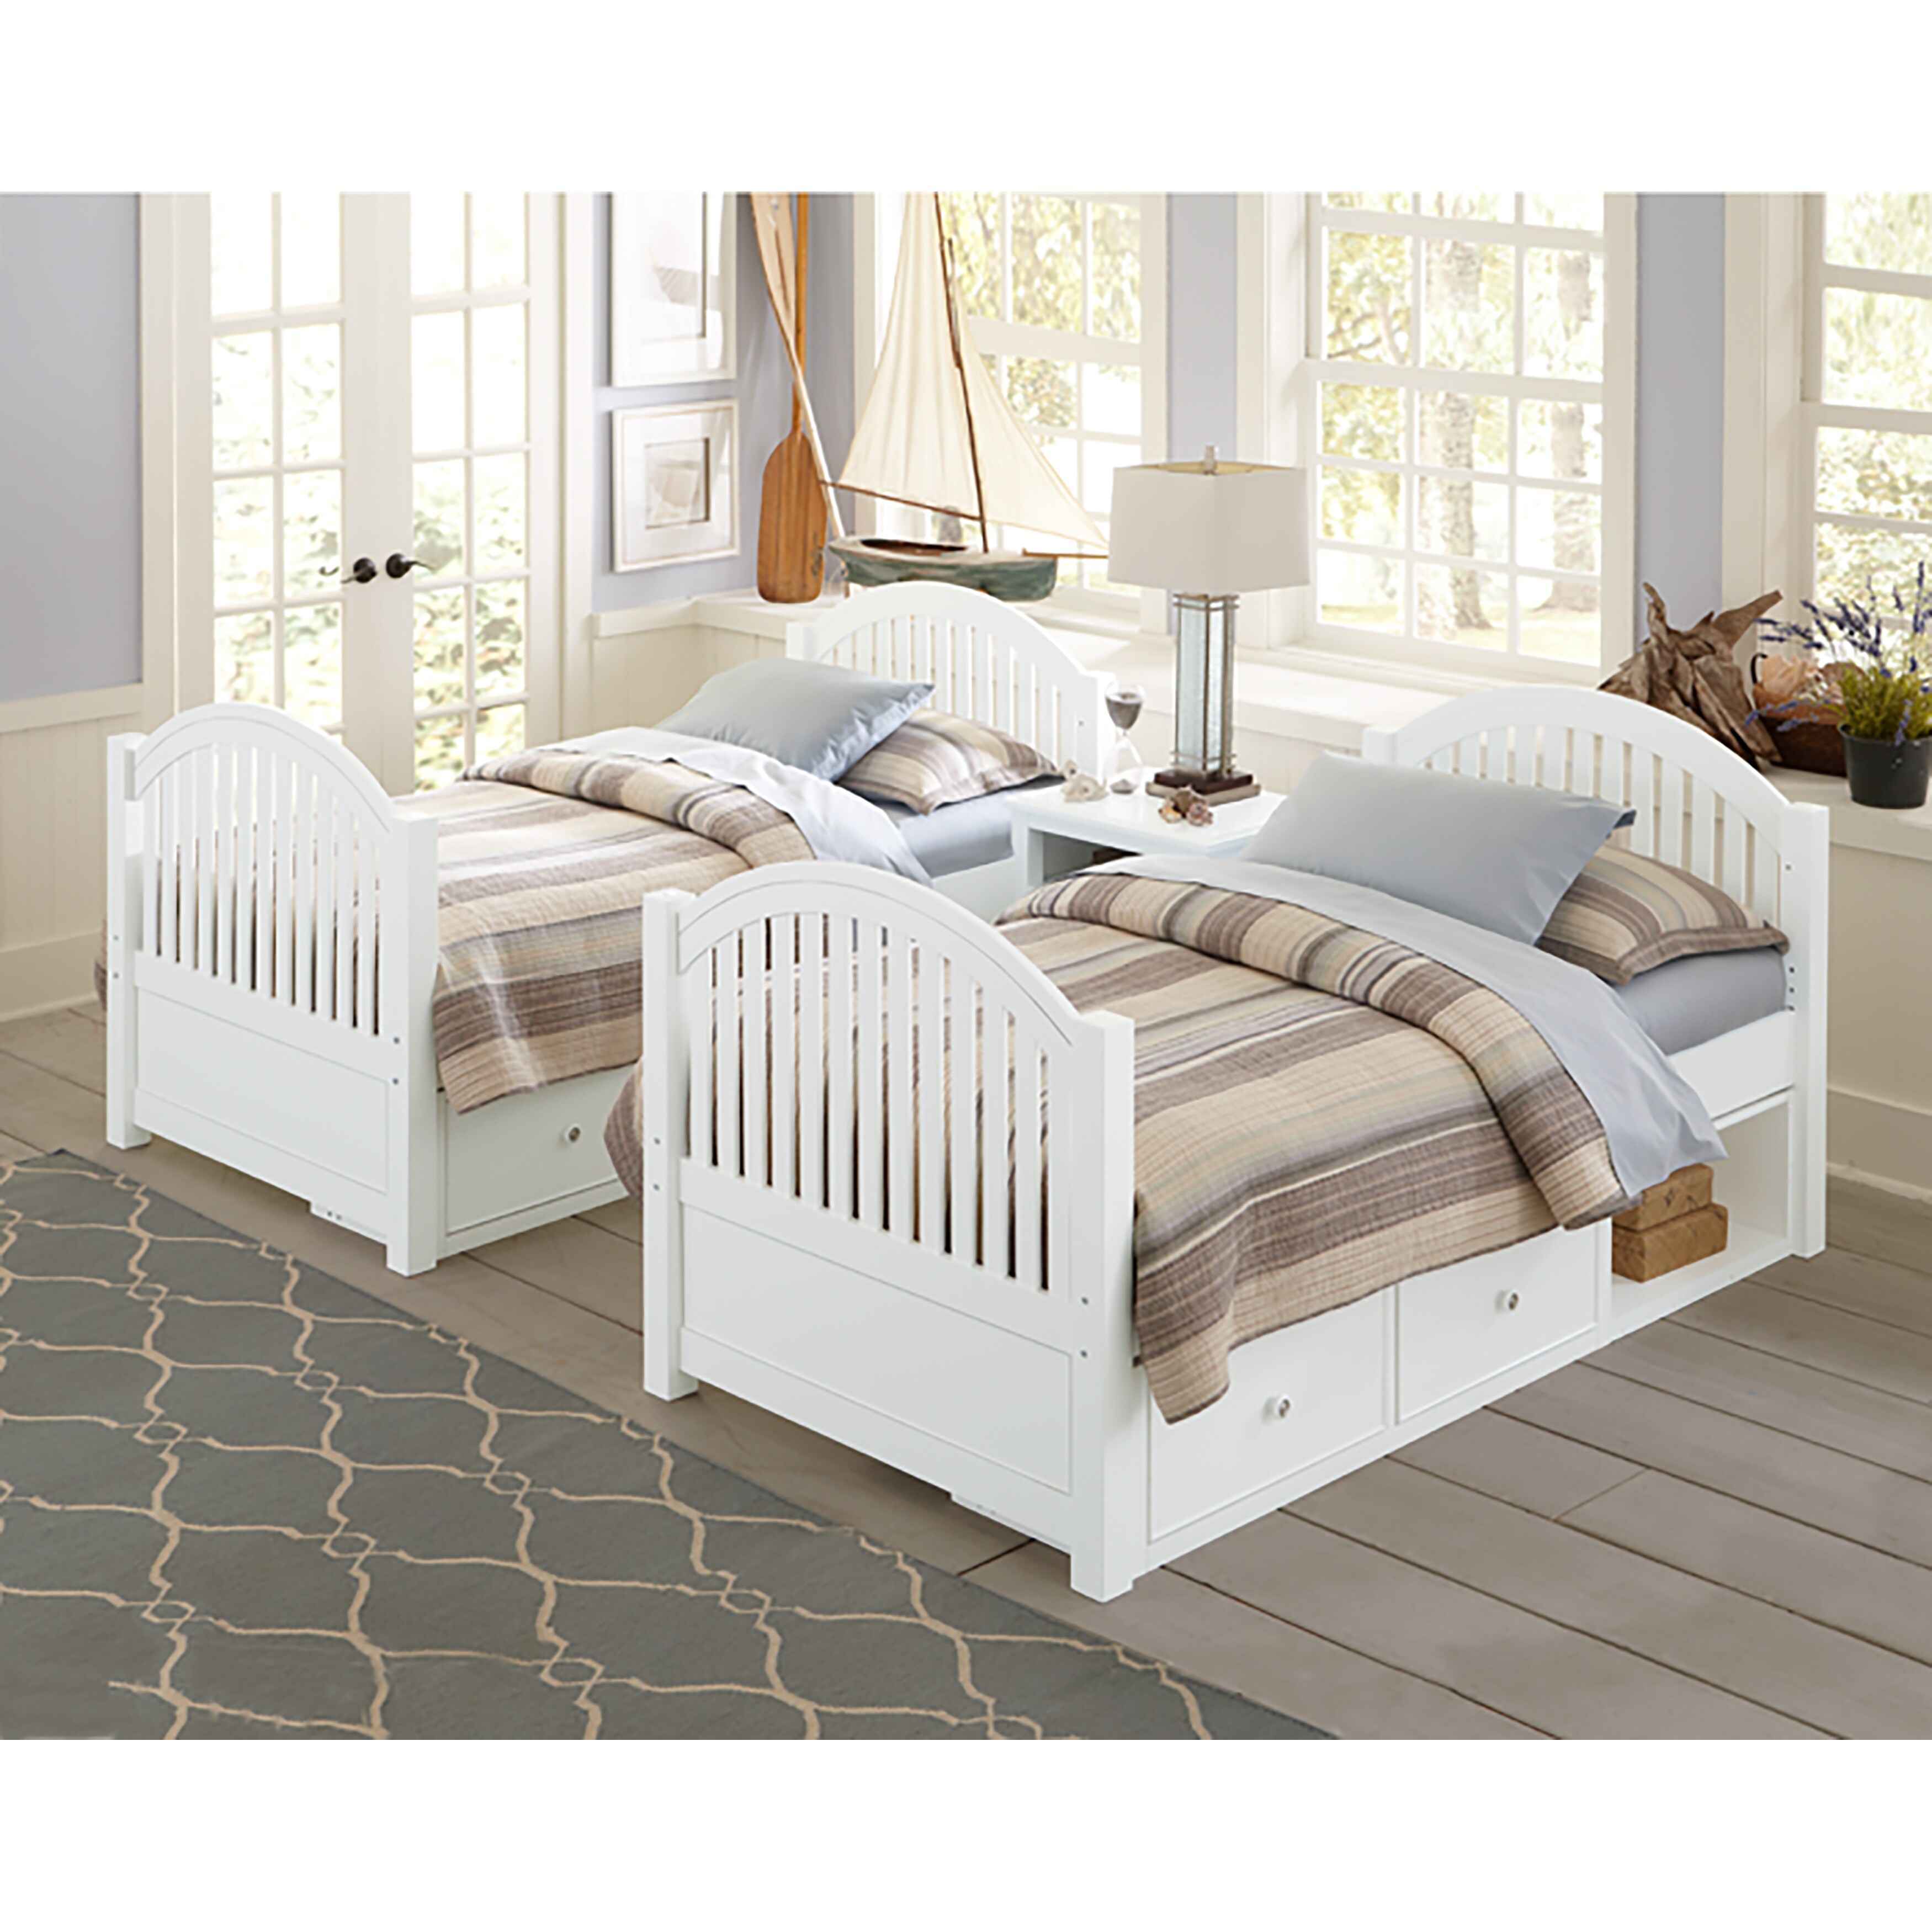 house twin bed